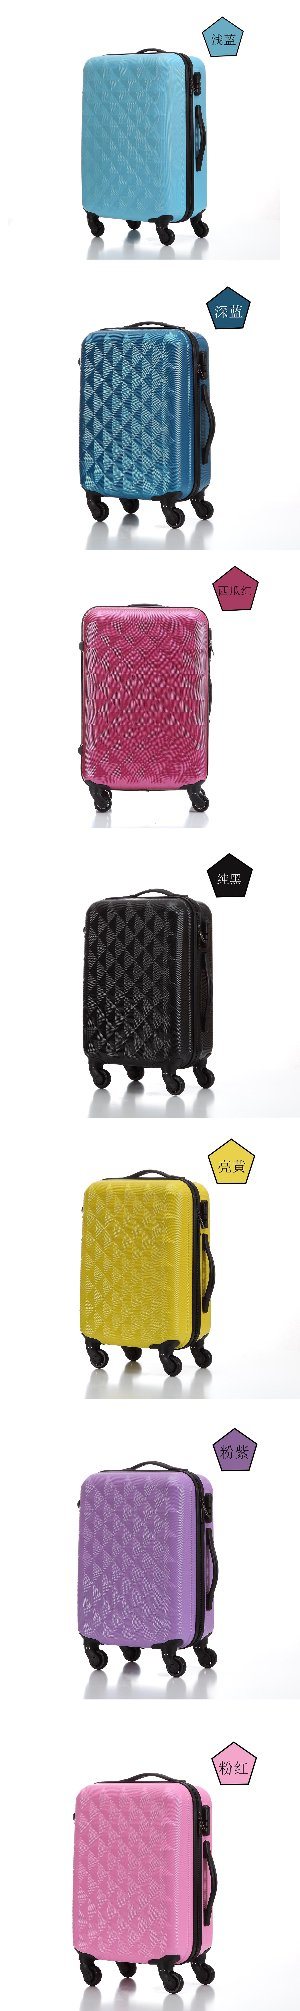 Luggage Manufacturer Traveling 3 Pieces Luggage Set, Trolley Case (XHA006)